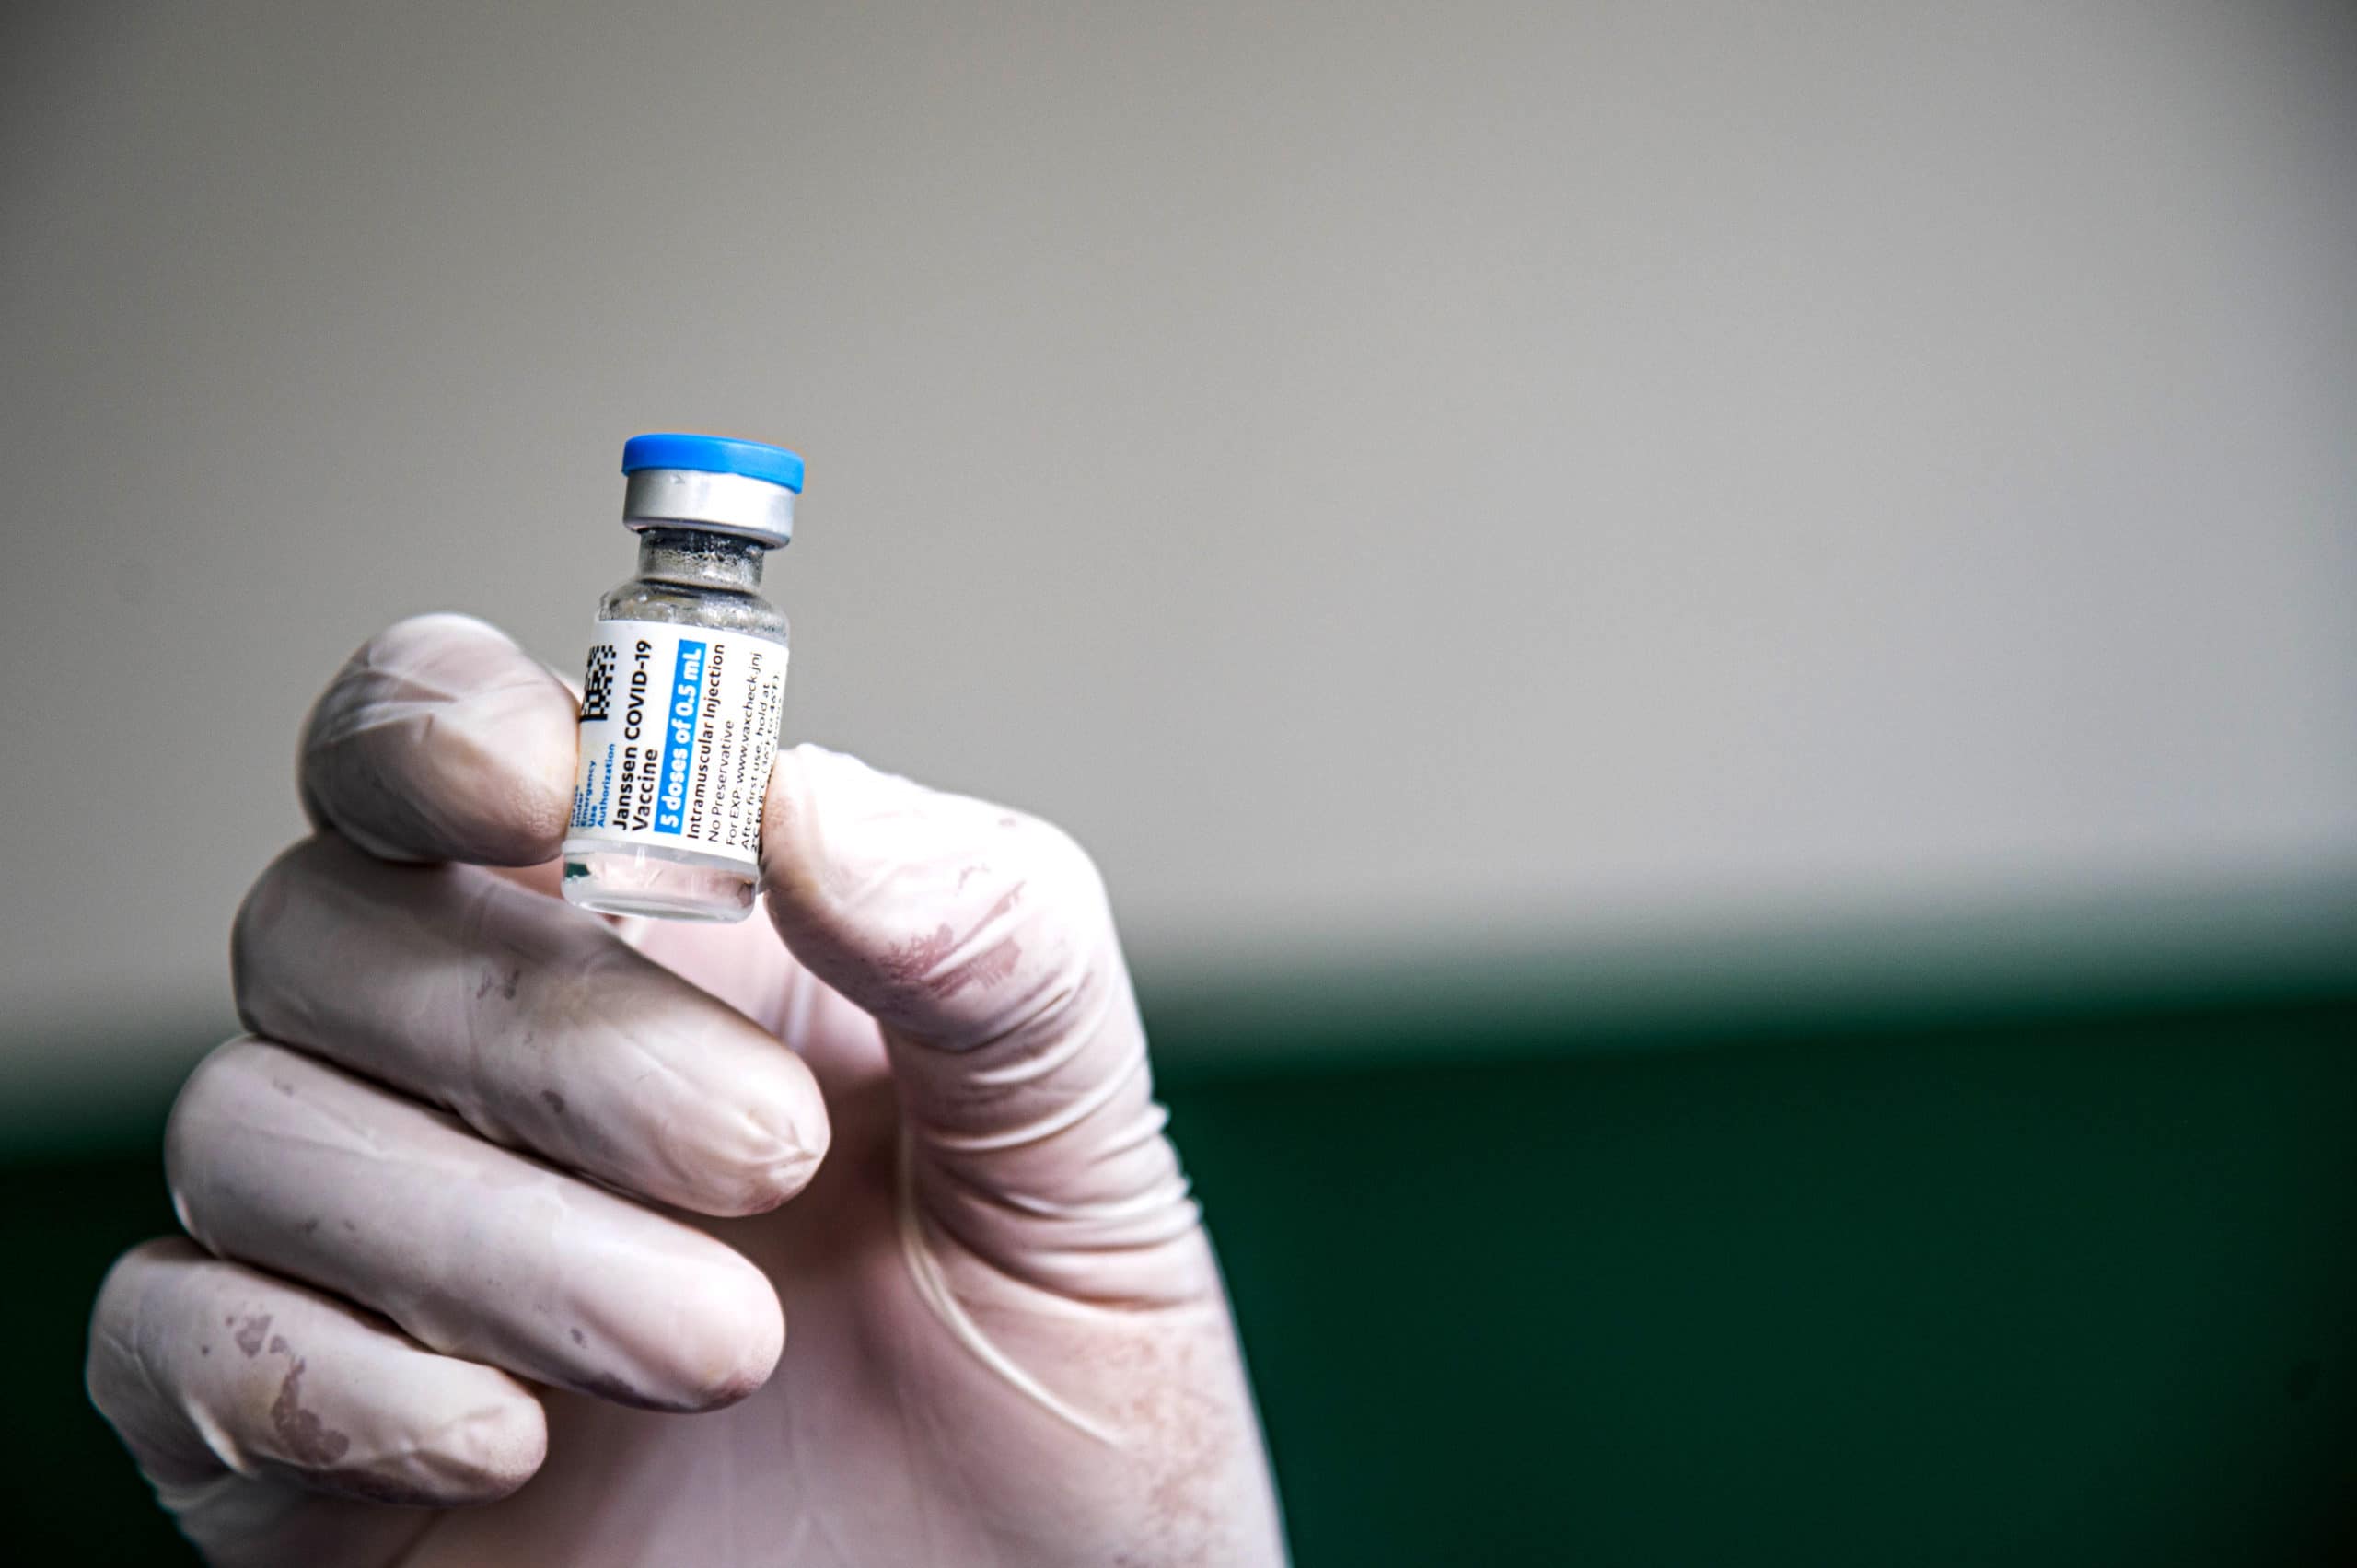 A health worker holds a vial of Janssen vaccine (American